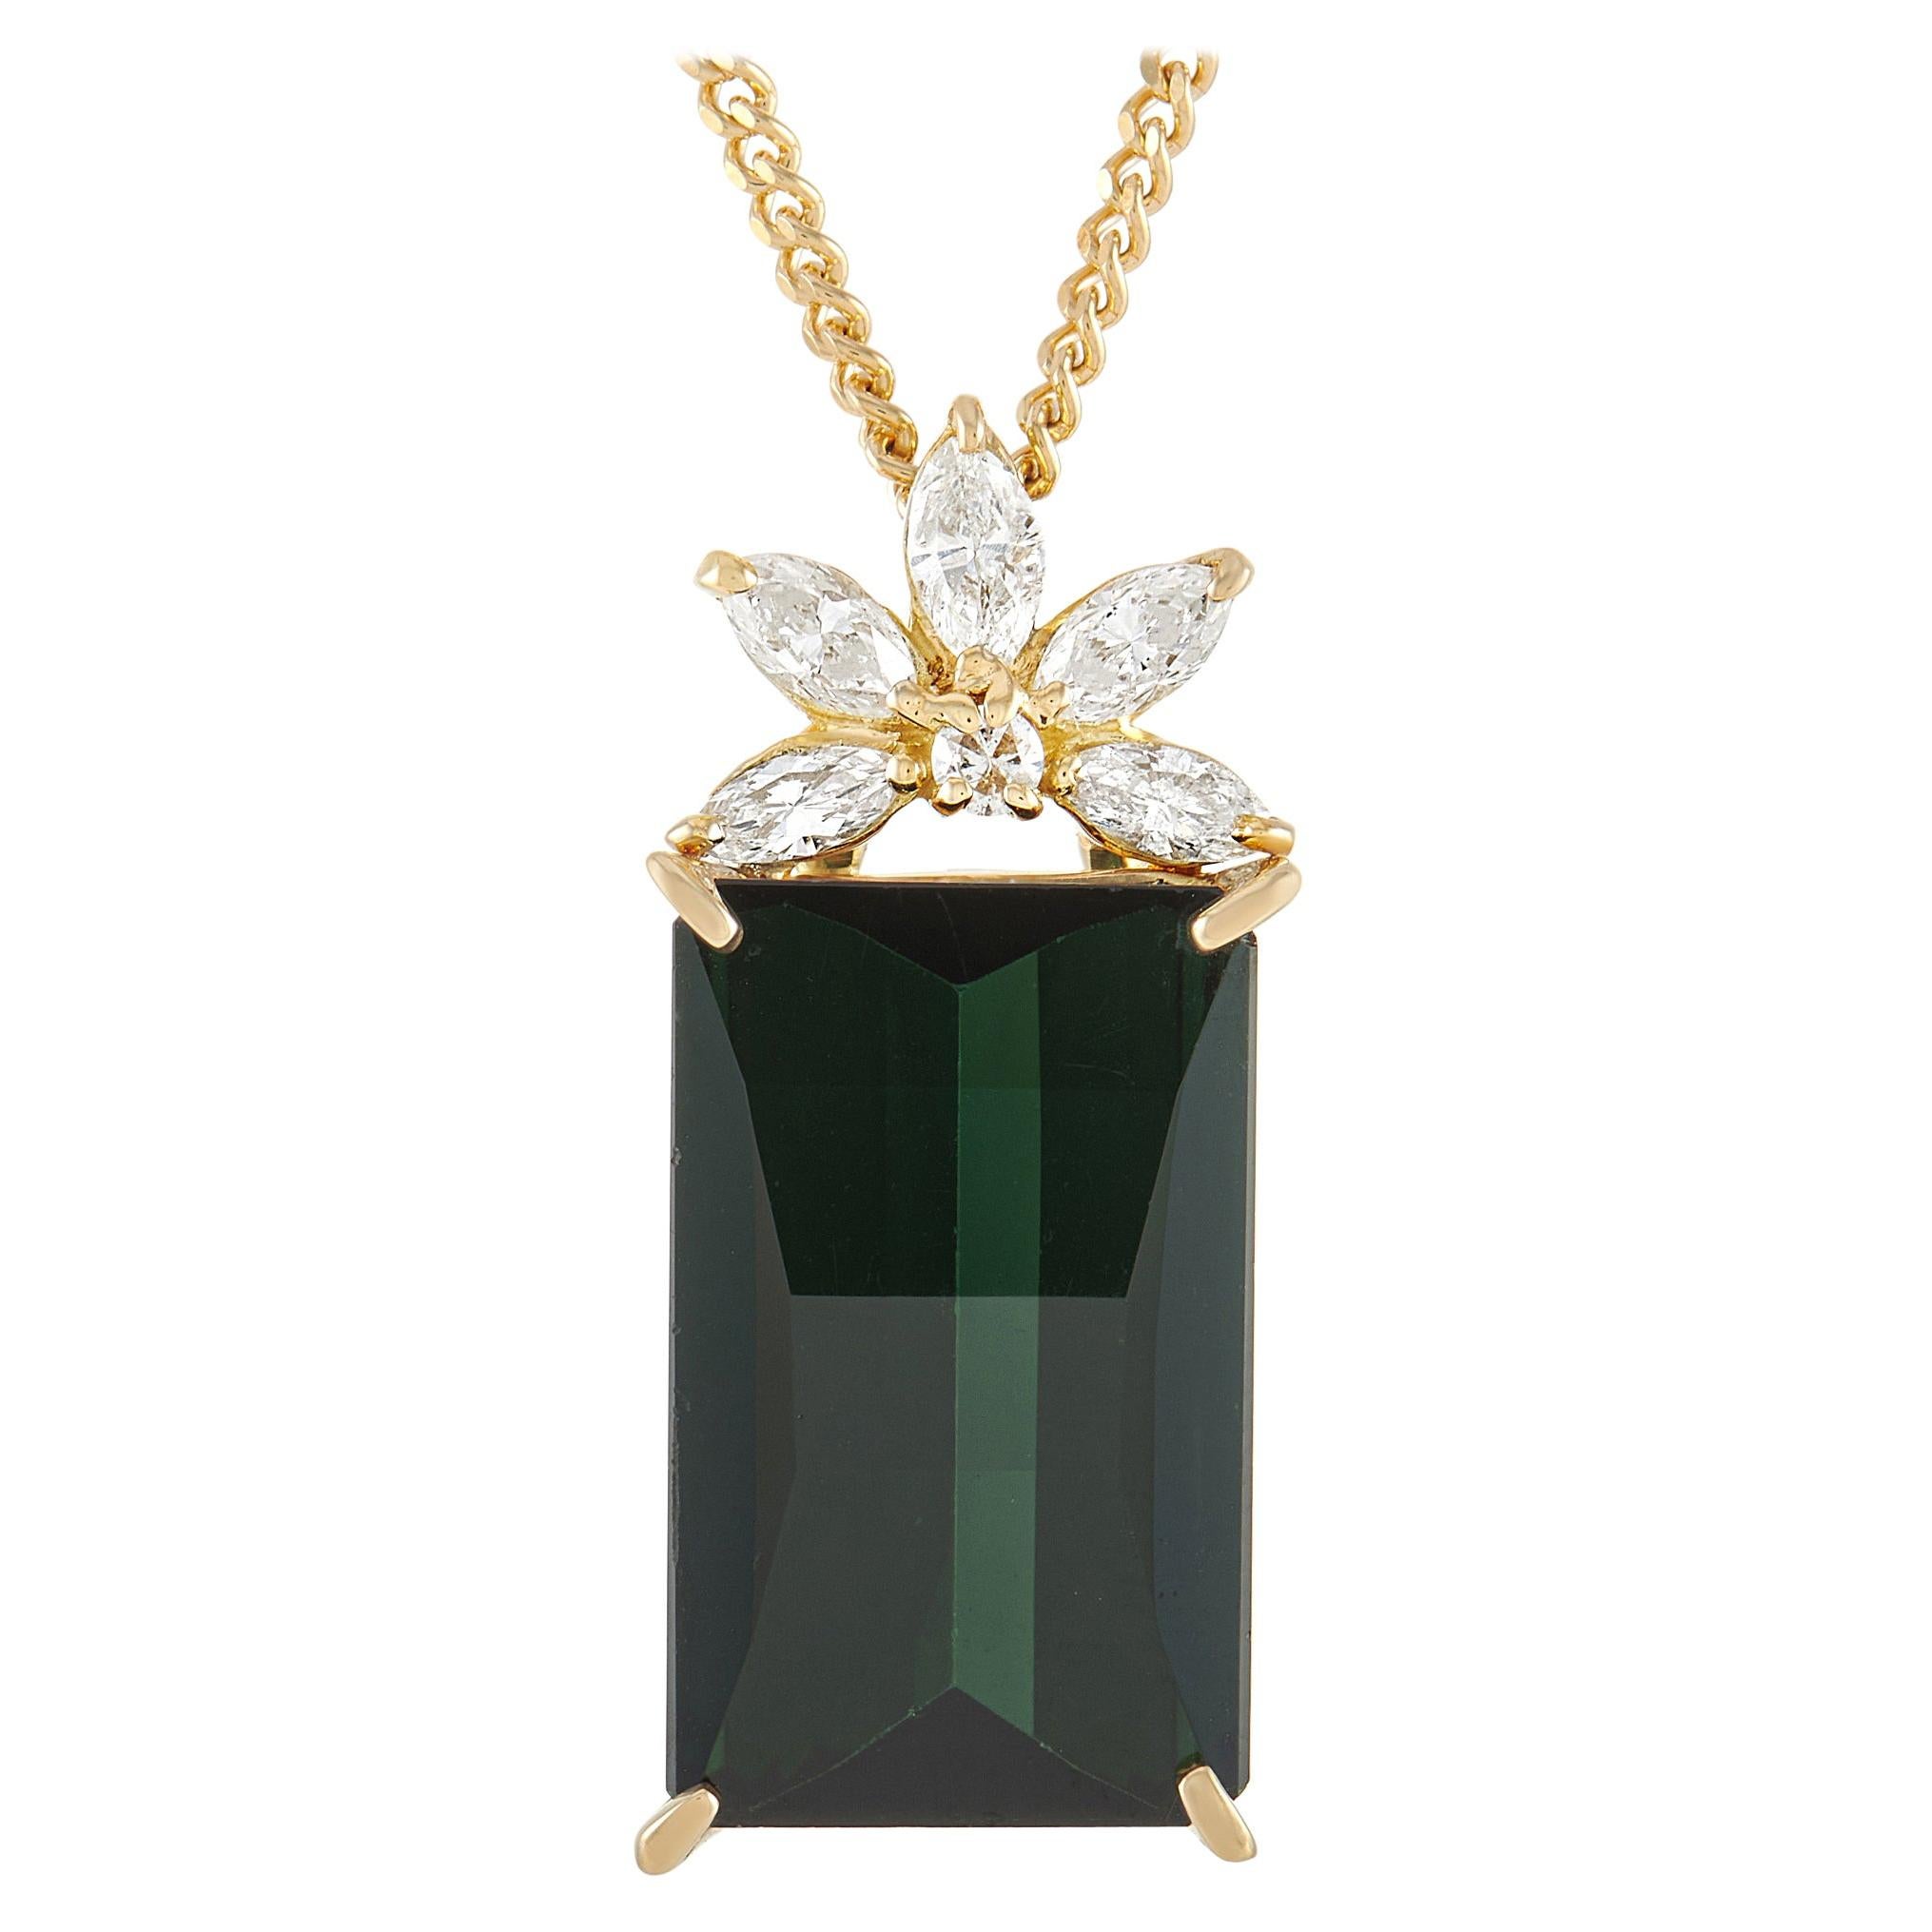 LB Exclusive 18K Yellow Gold 0.38ct Diamond and Tourmaline Pendant Necklace